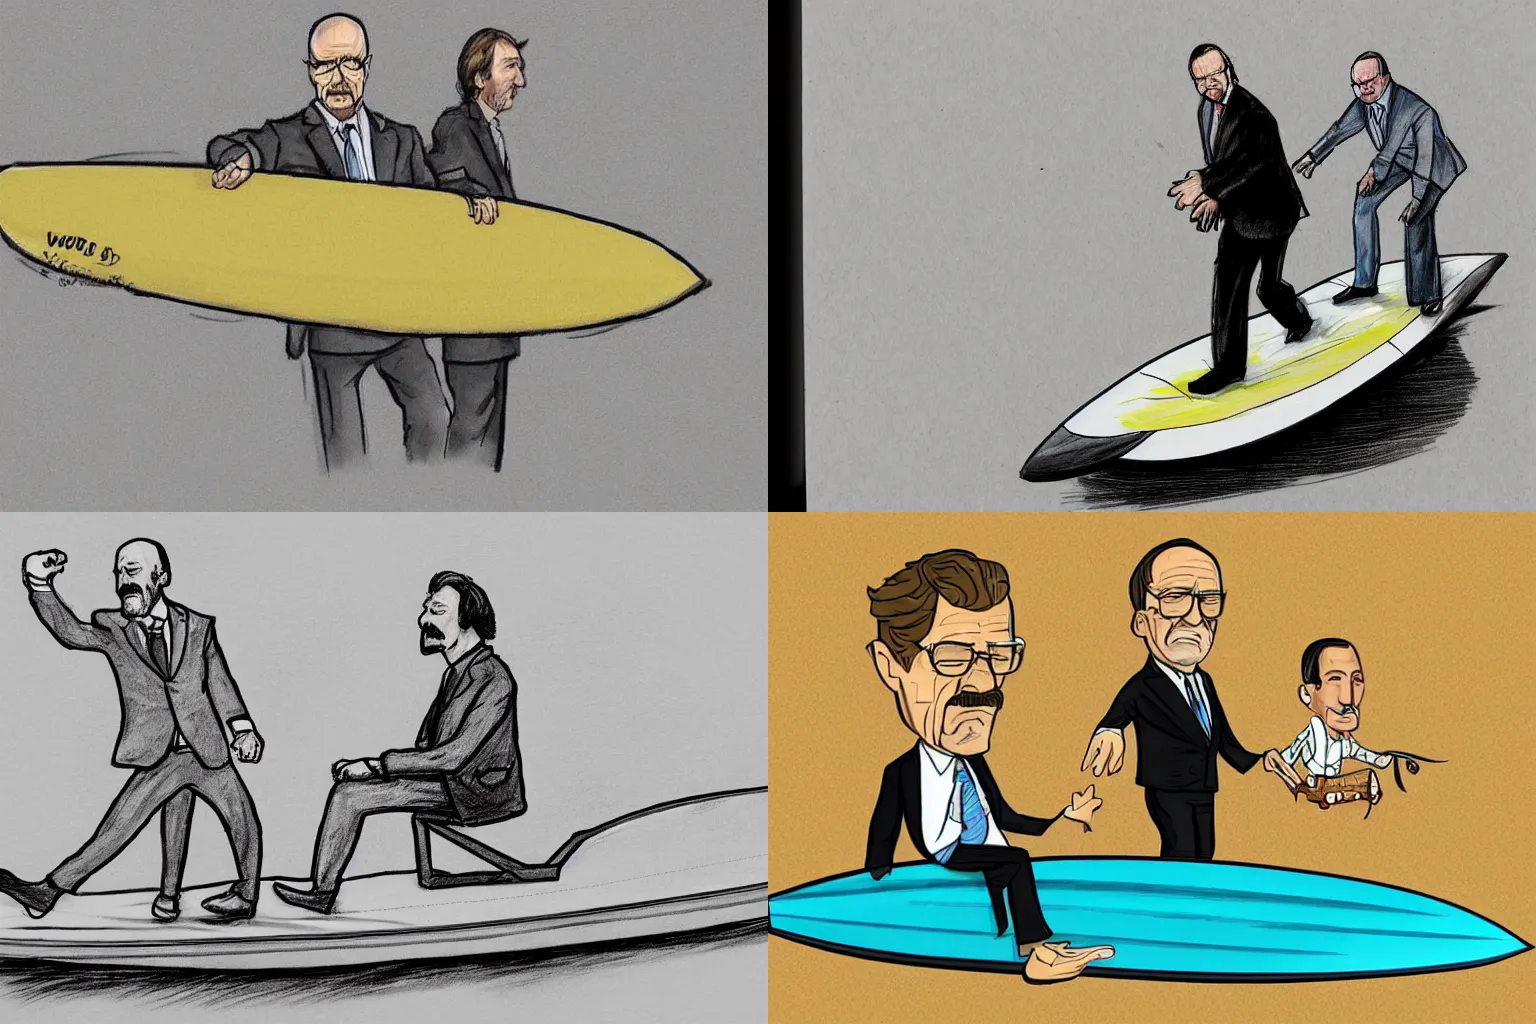 Prompt: court sketch of walter white riding a comically large surfboard, with saul goodman presenting